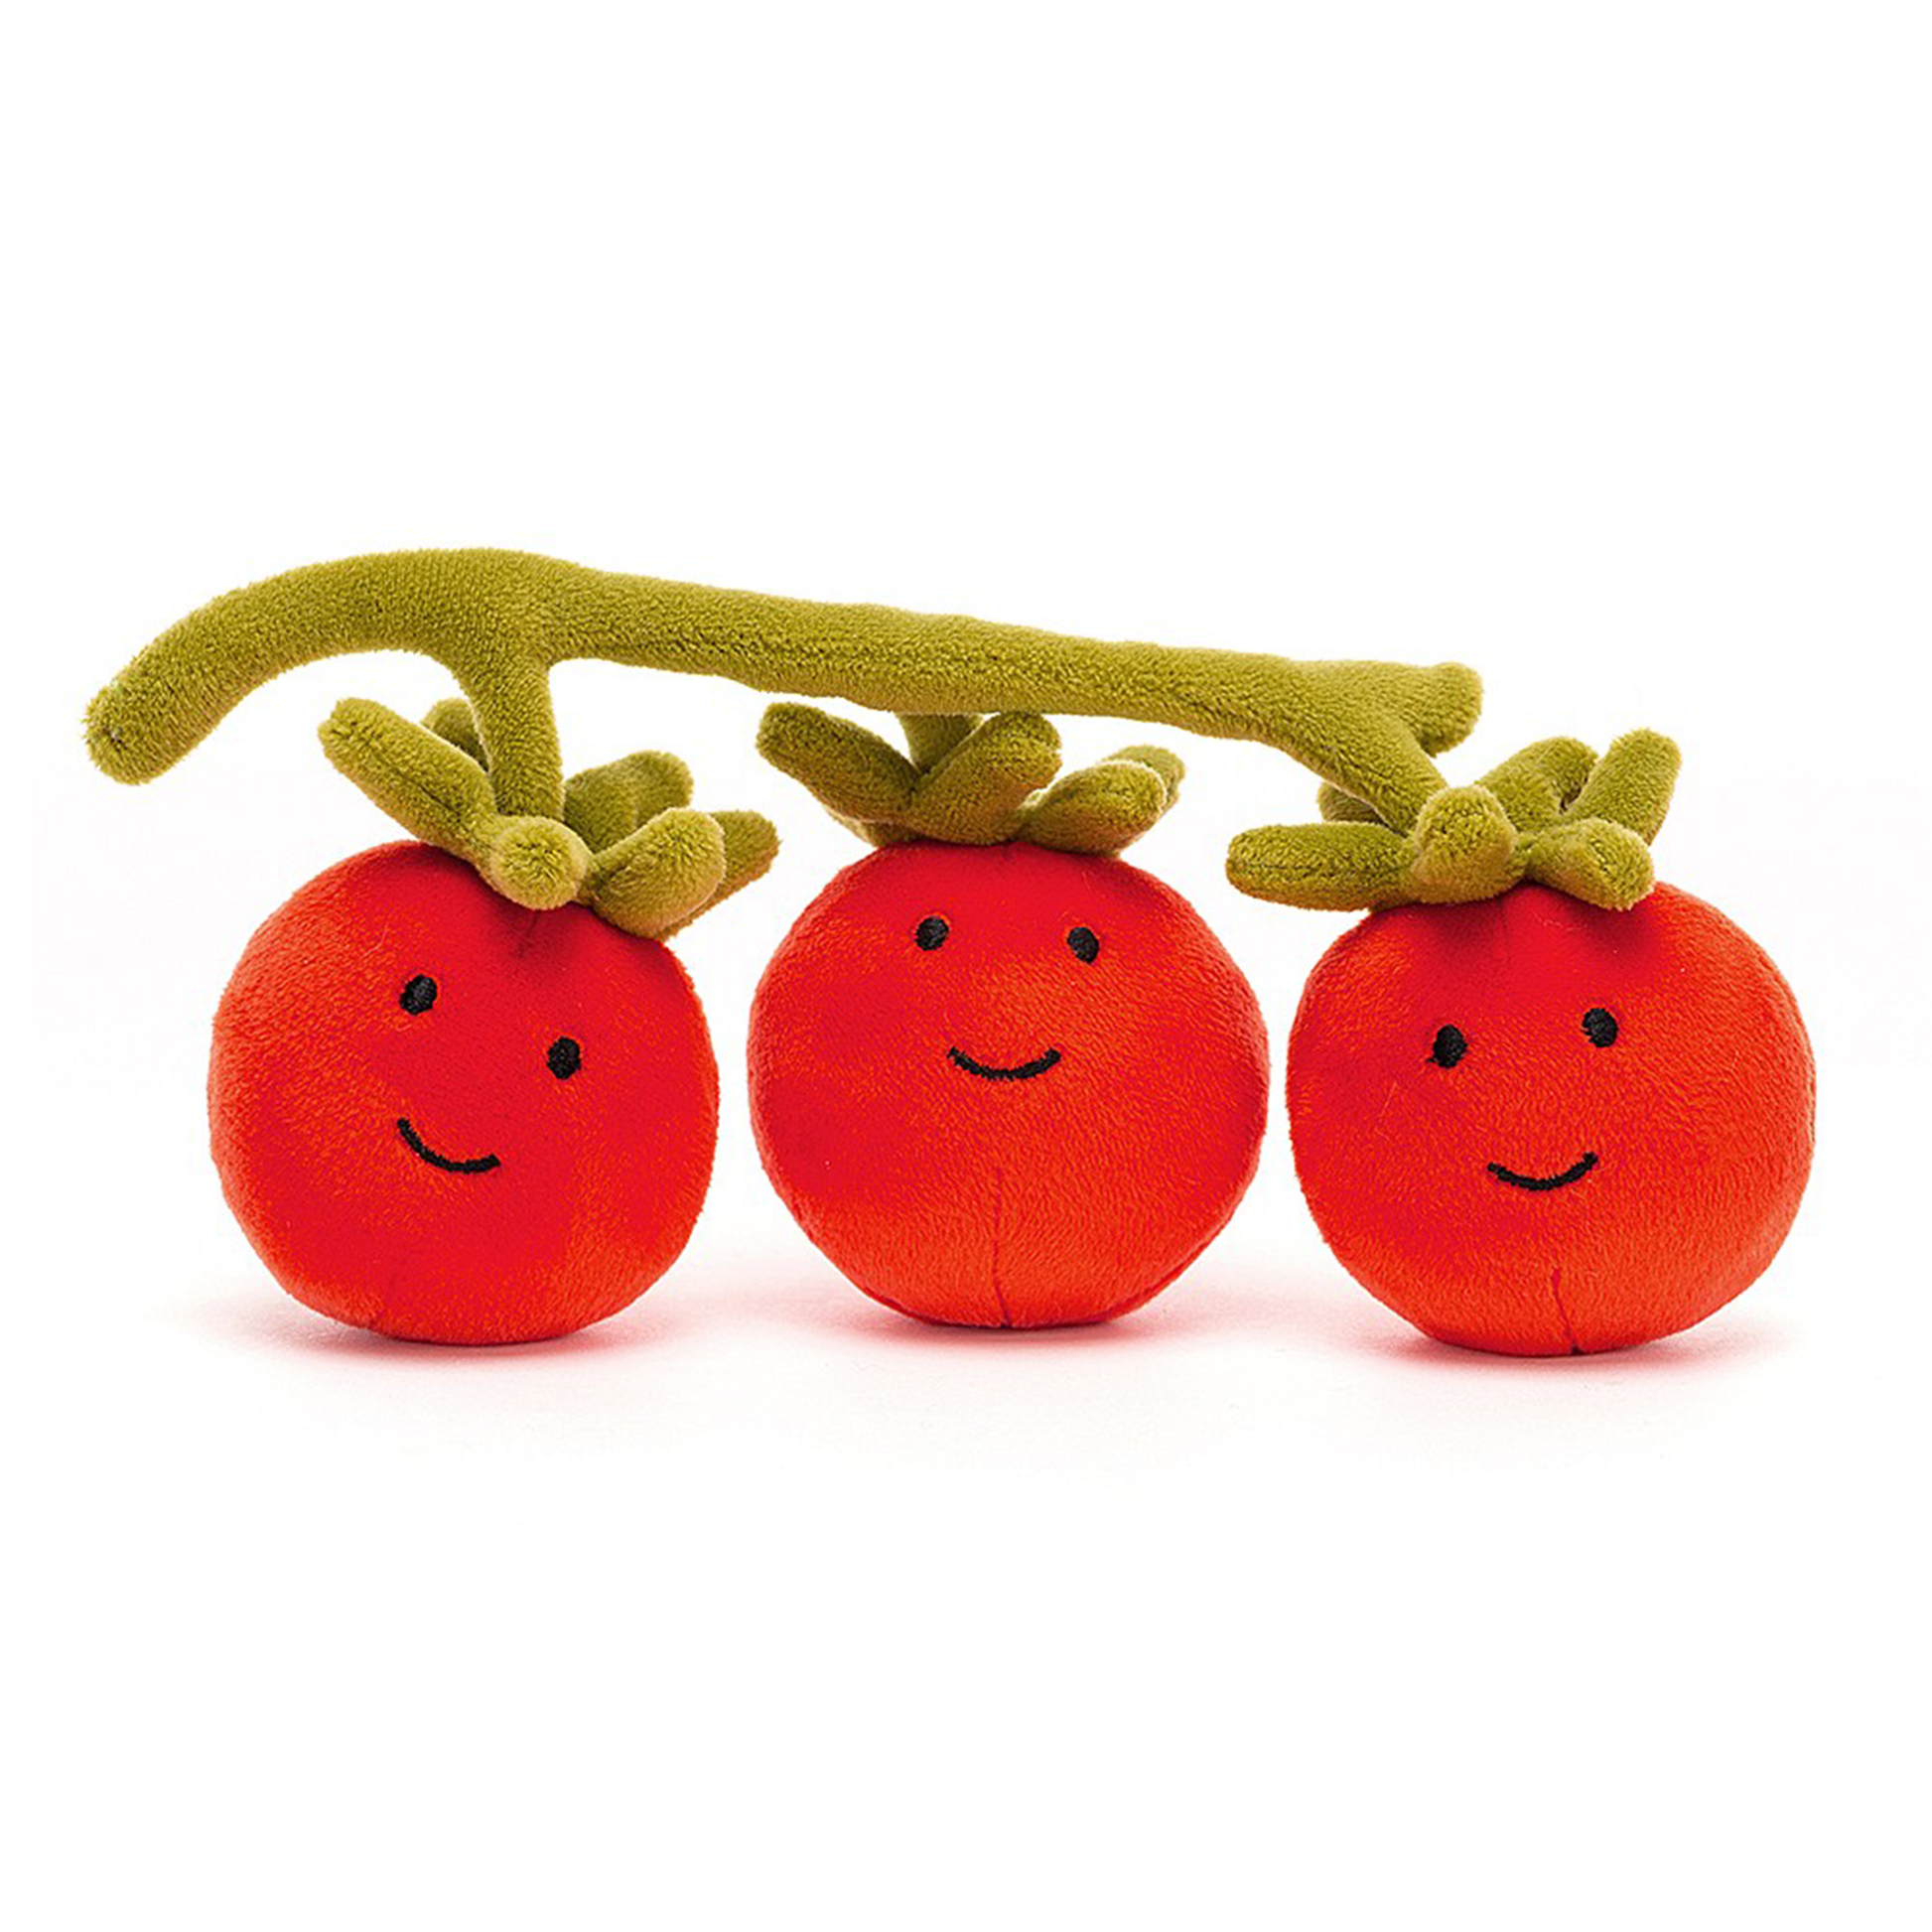 Three smiling red tomatoes on a green vine